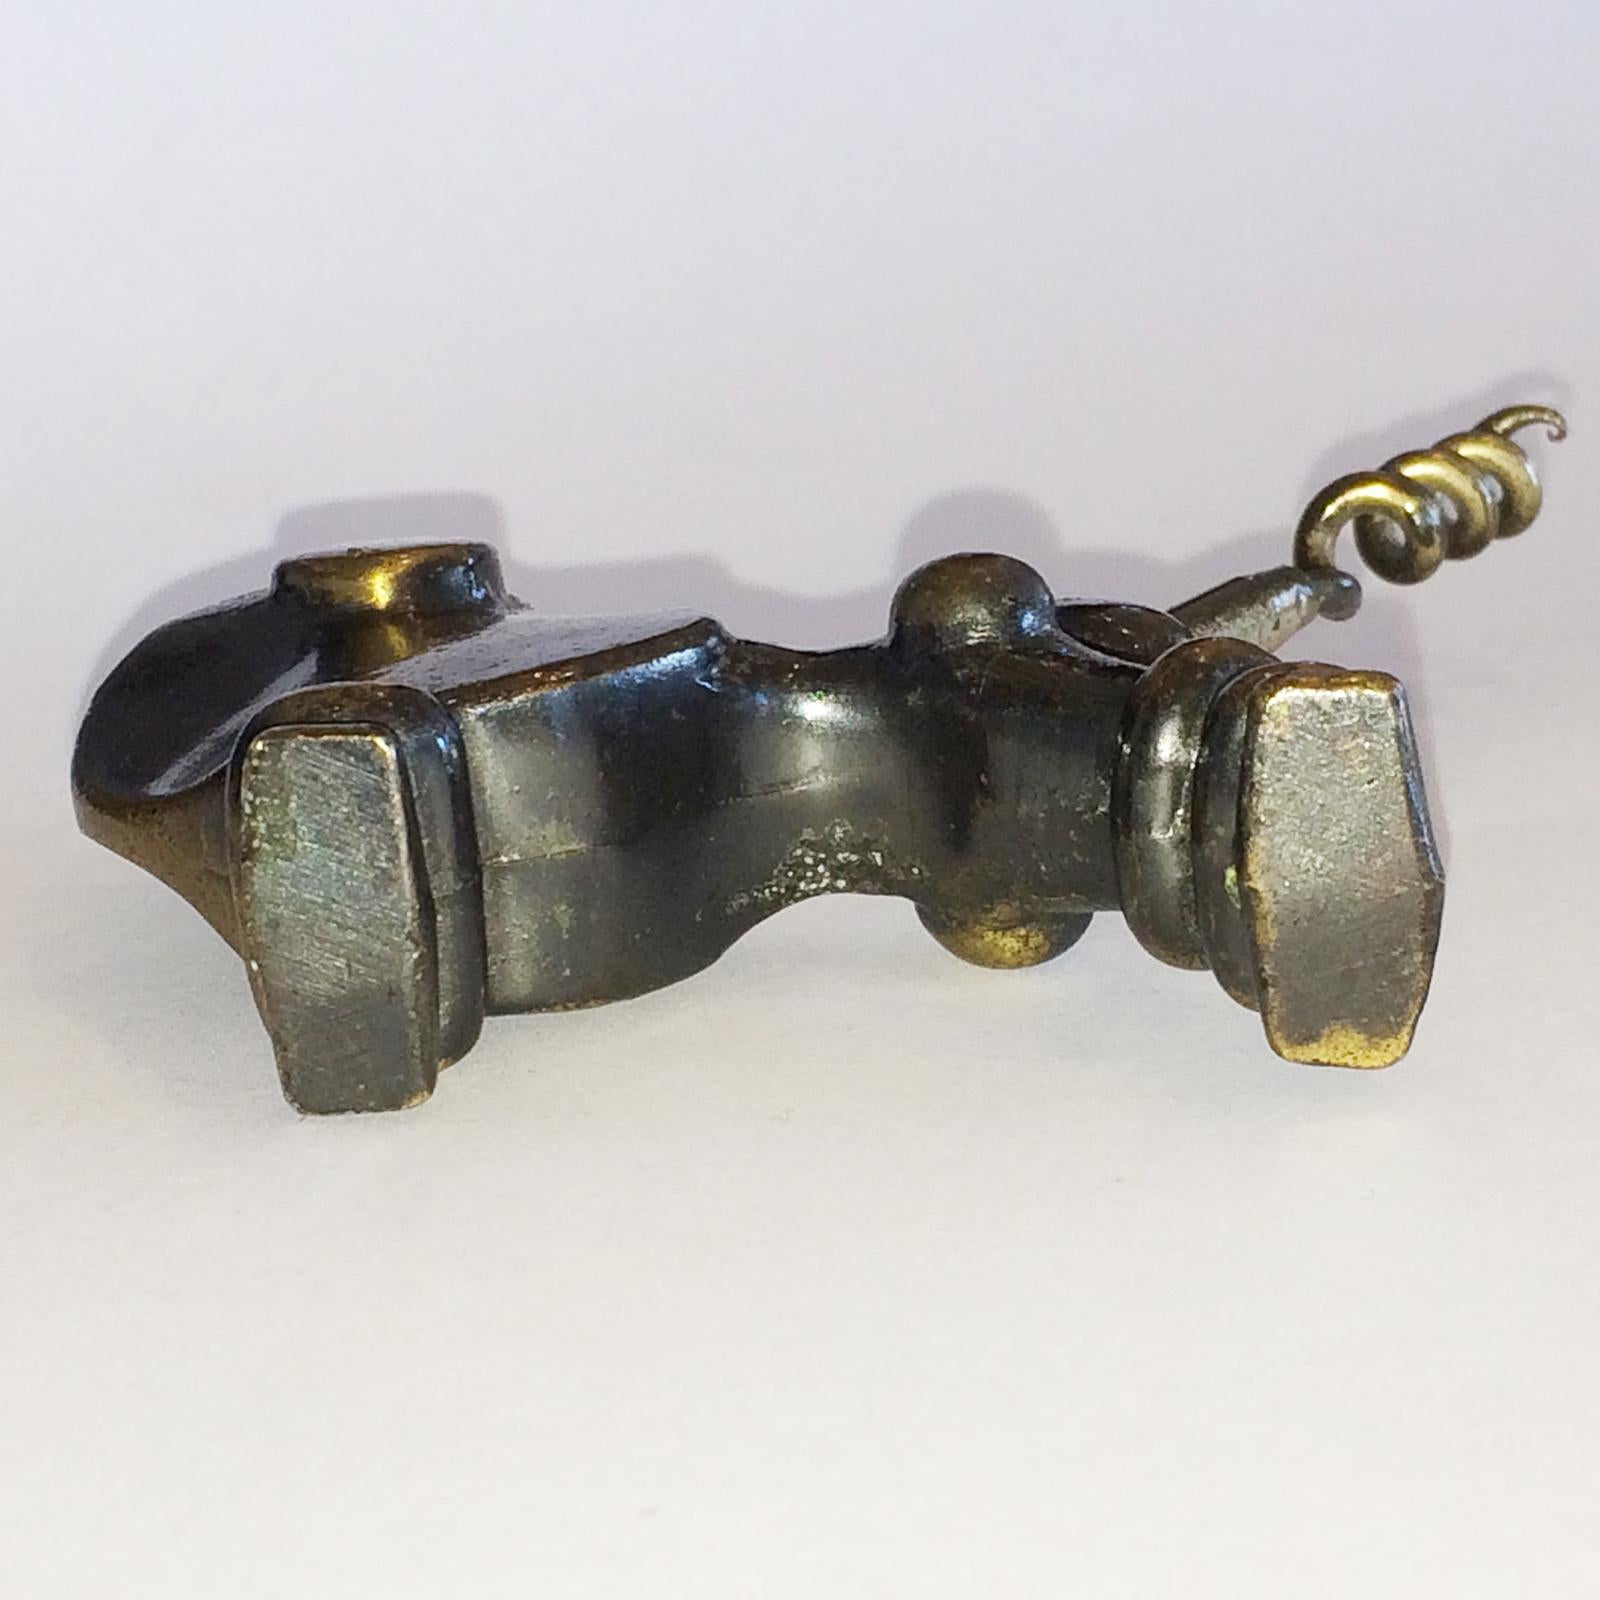 Midcentury unusual corkscrew with bronzed, stylized and geometric poodle with hand-forged screw to tail. The poodle is in a “japanned” finish with black and bronze glaze. General aged patina according to age, but in excellent, strong condition with